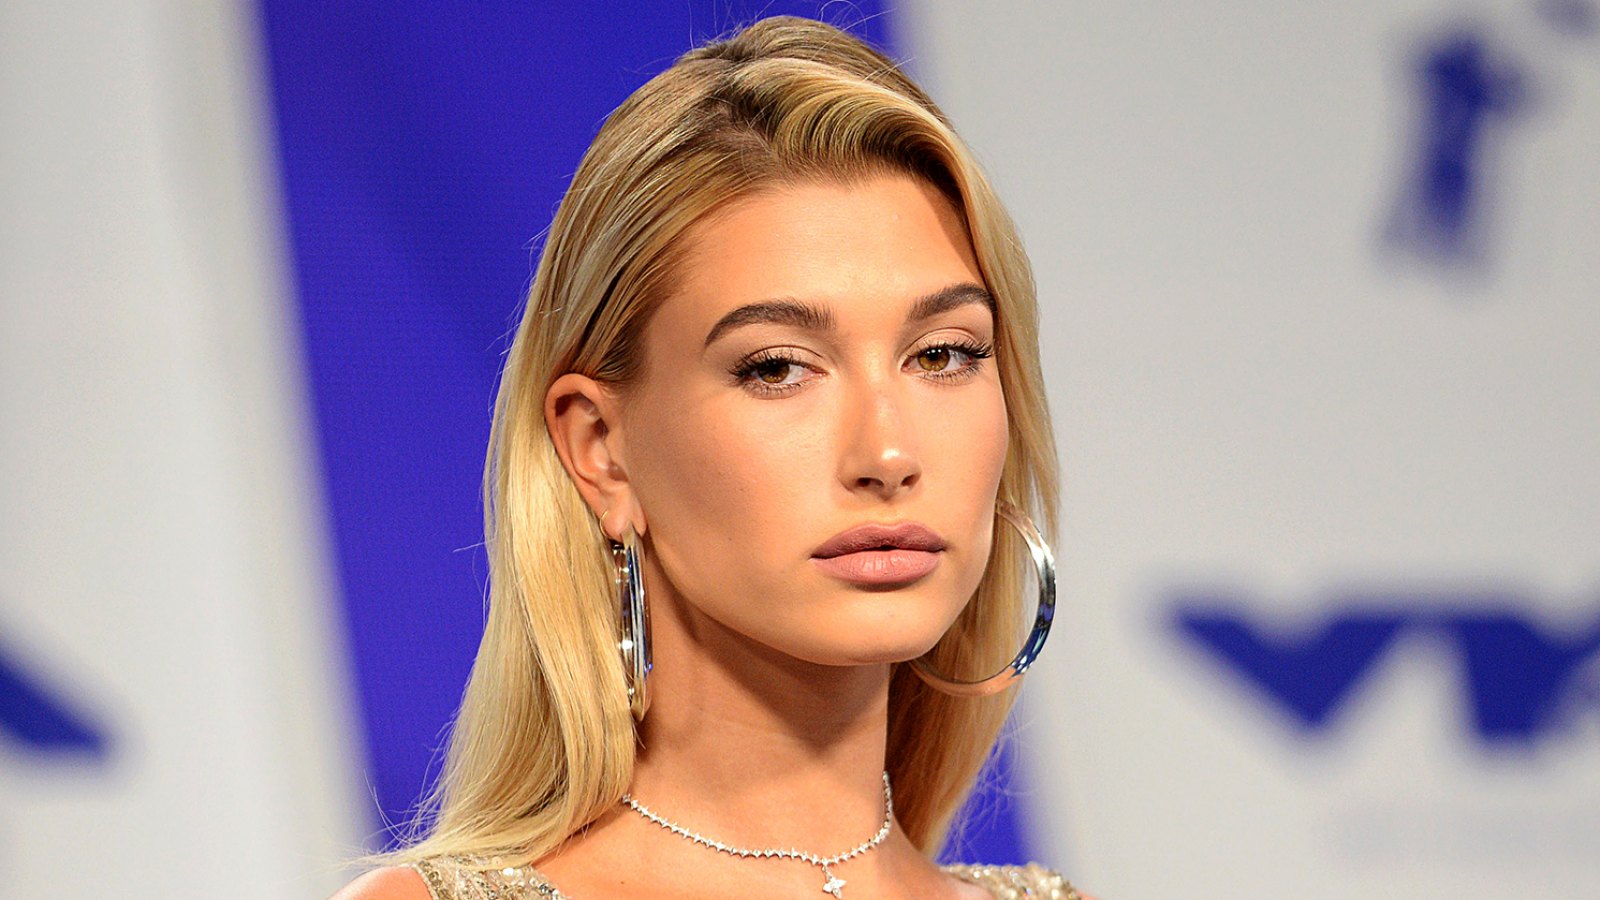 Hailey Baldwin Hospitalized With Brain Condition After Suffering Medical Emergency